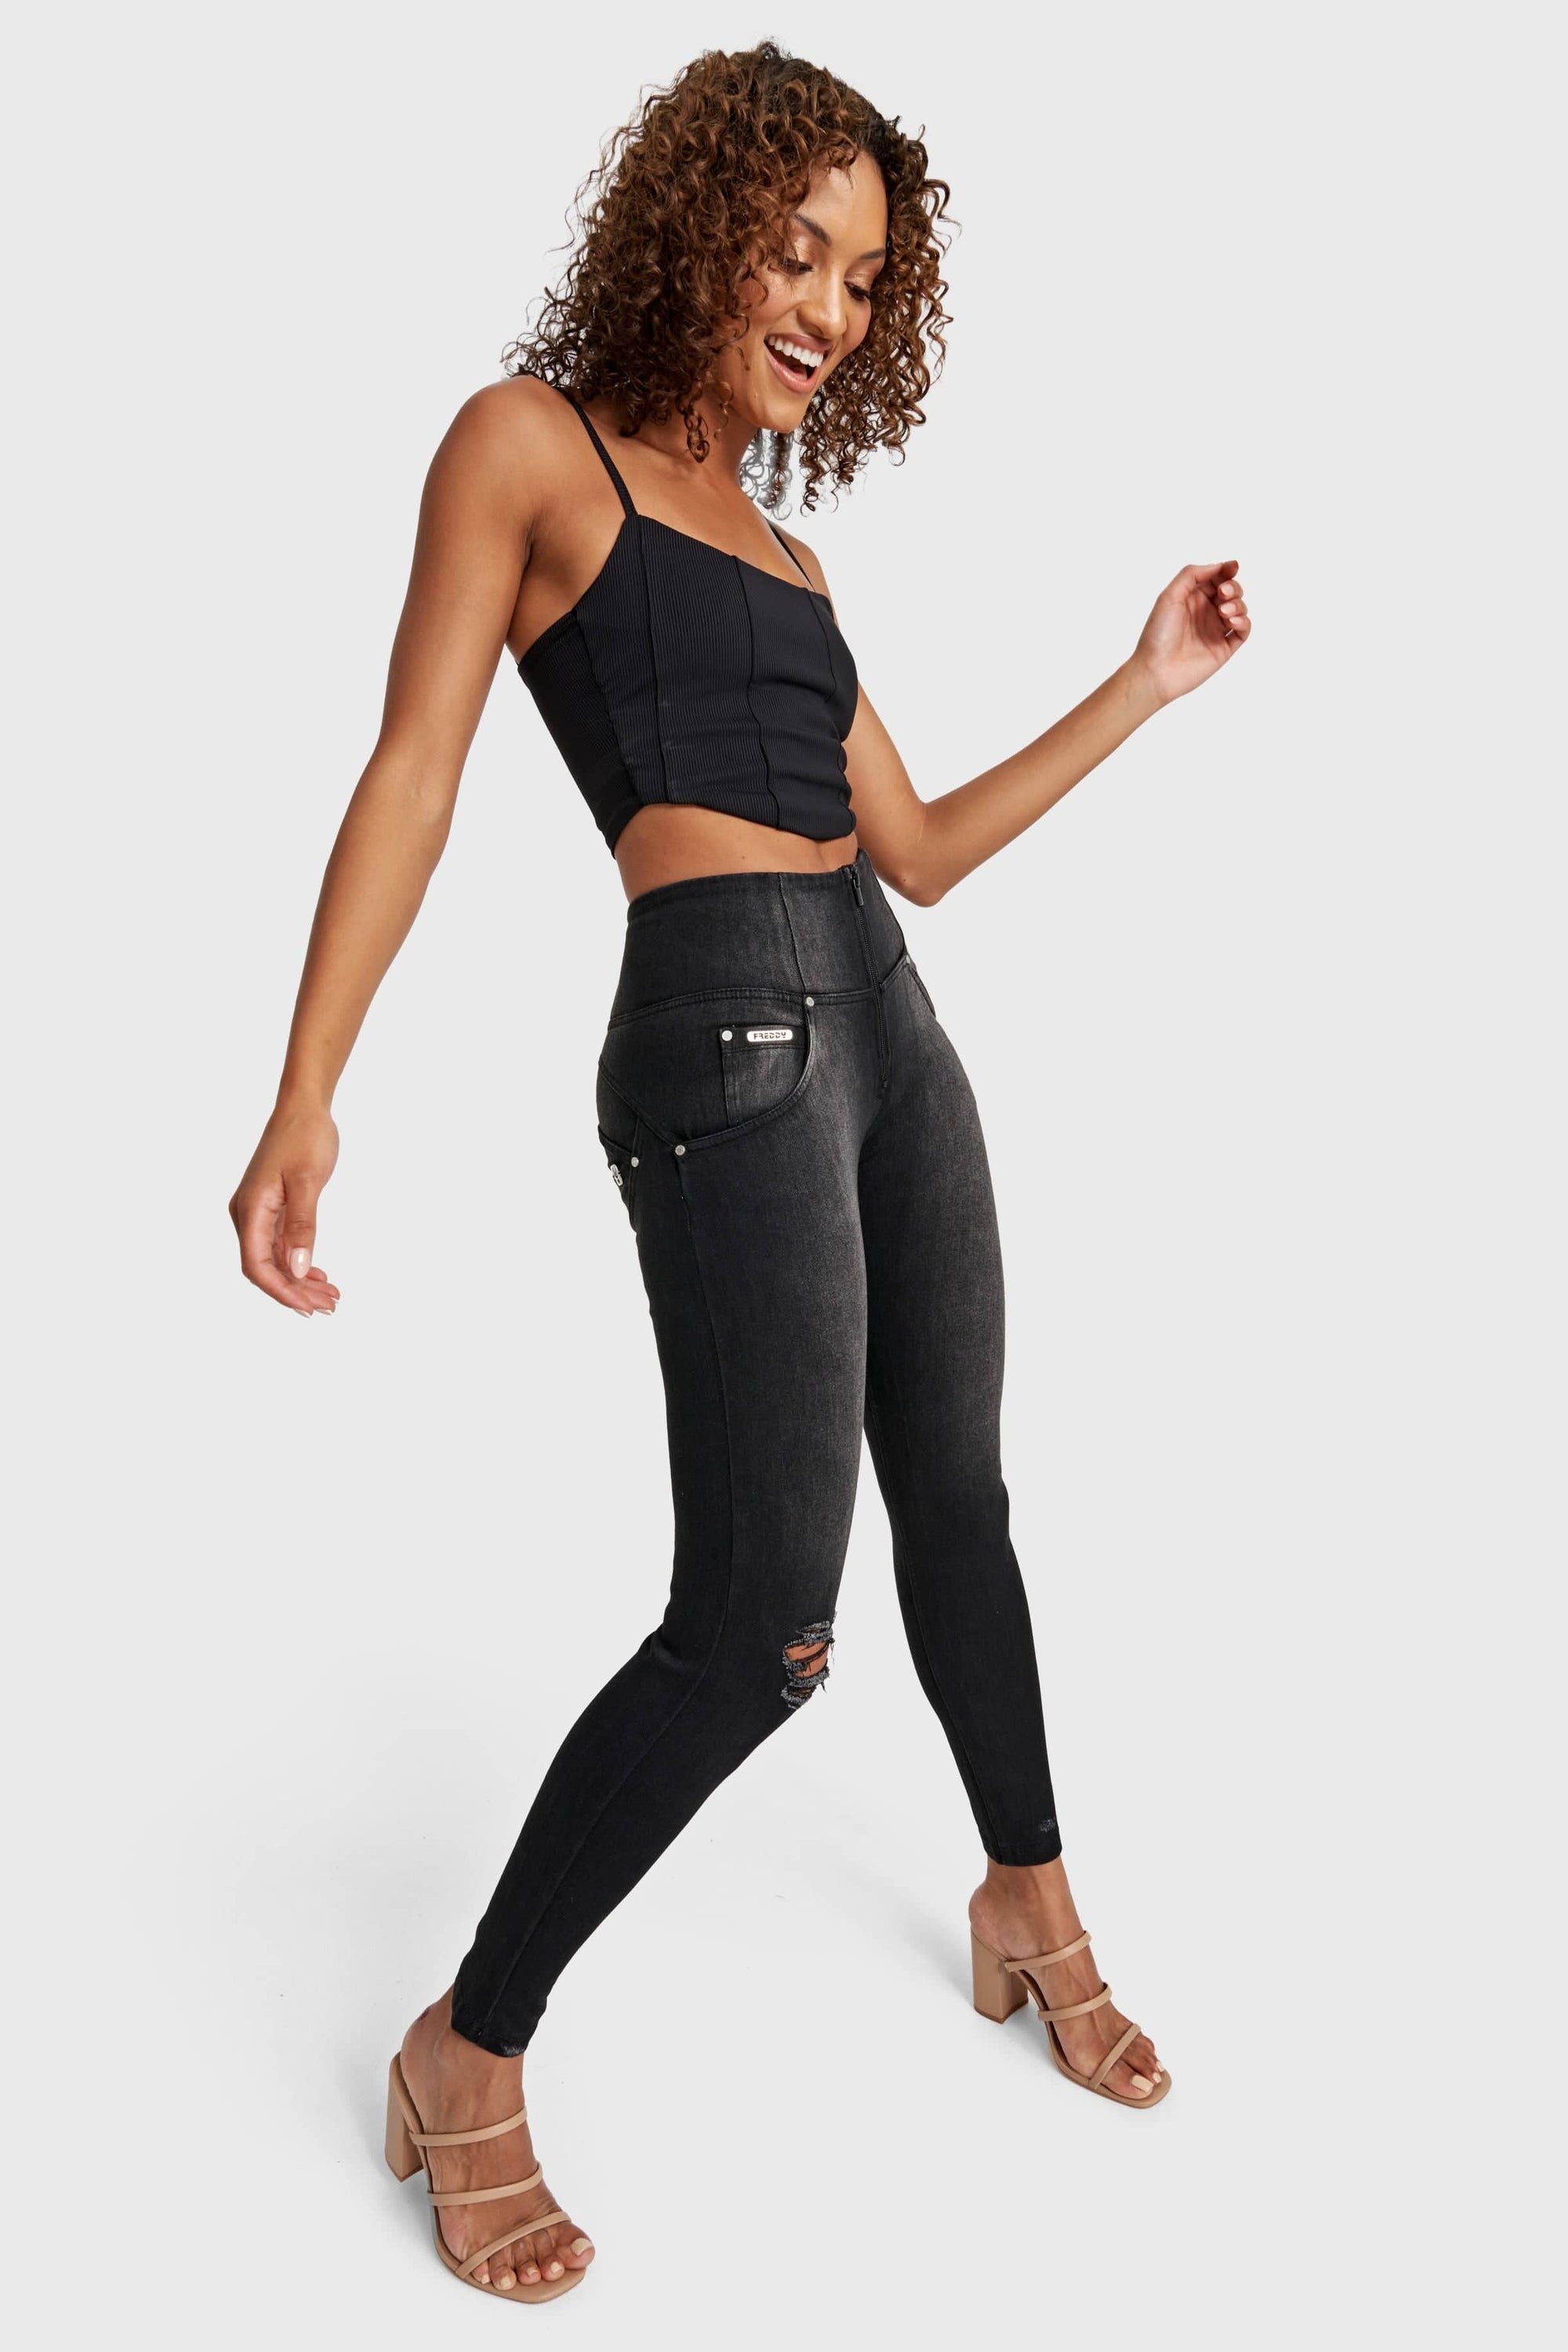 WR.UP® Snug Distressed Jeans - High Waisted - Full Length - Black + Black Stitching 9